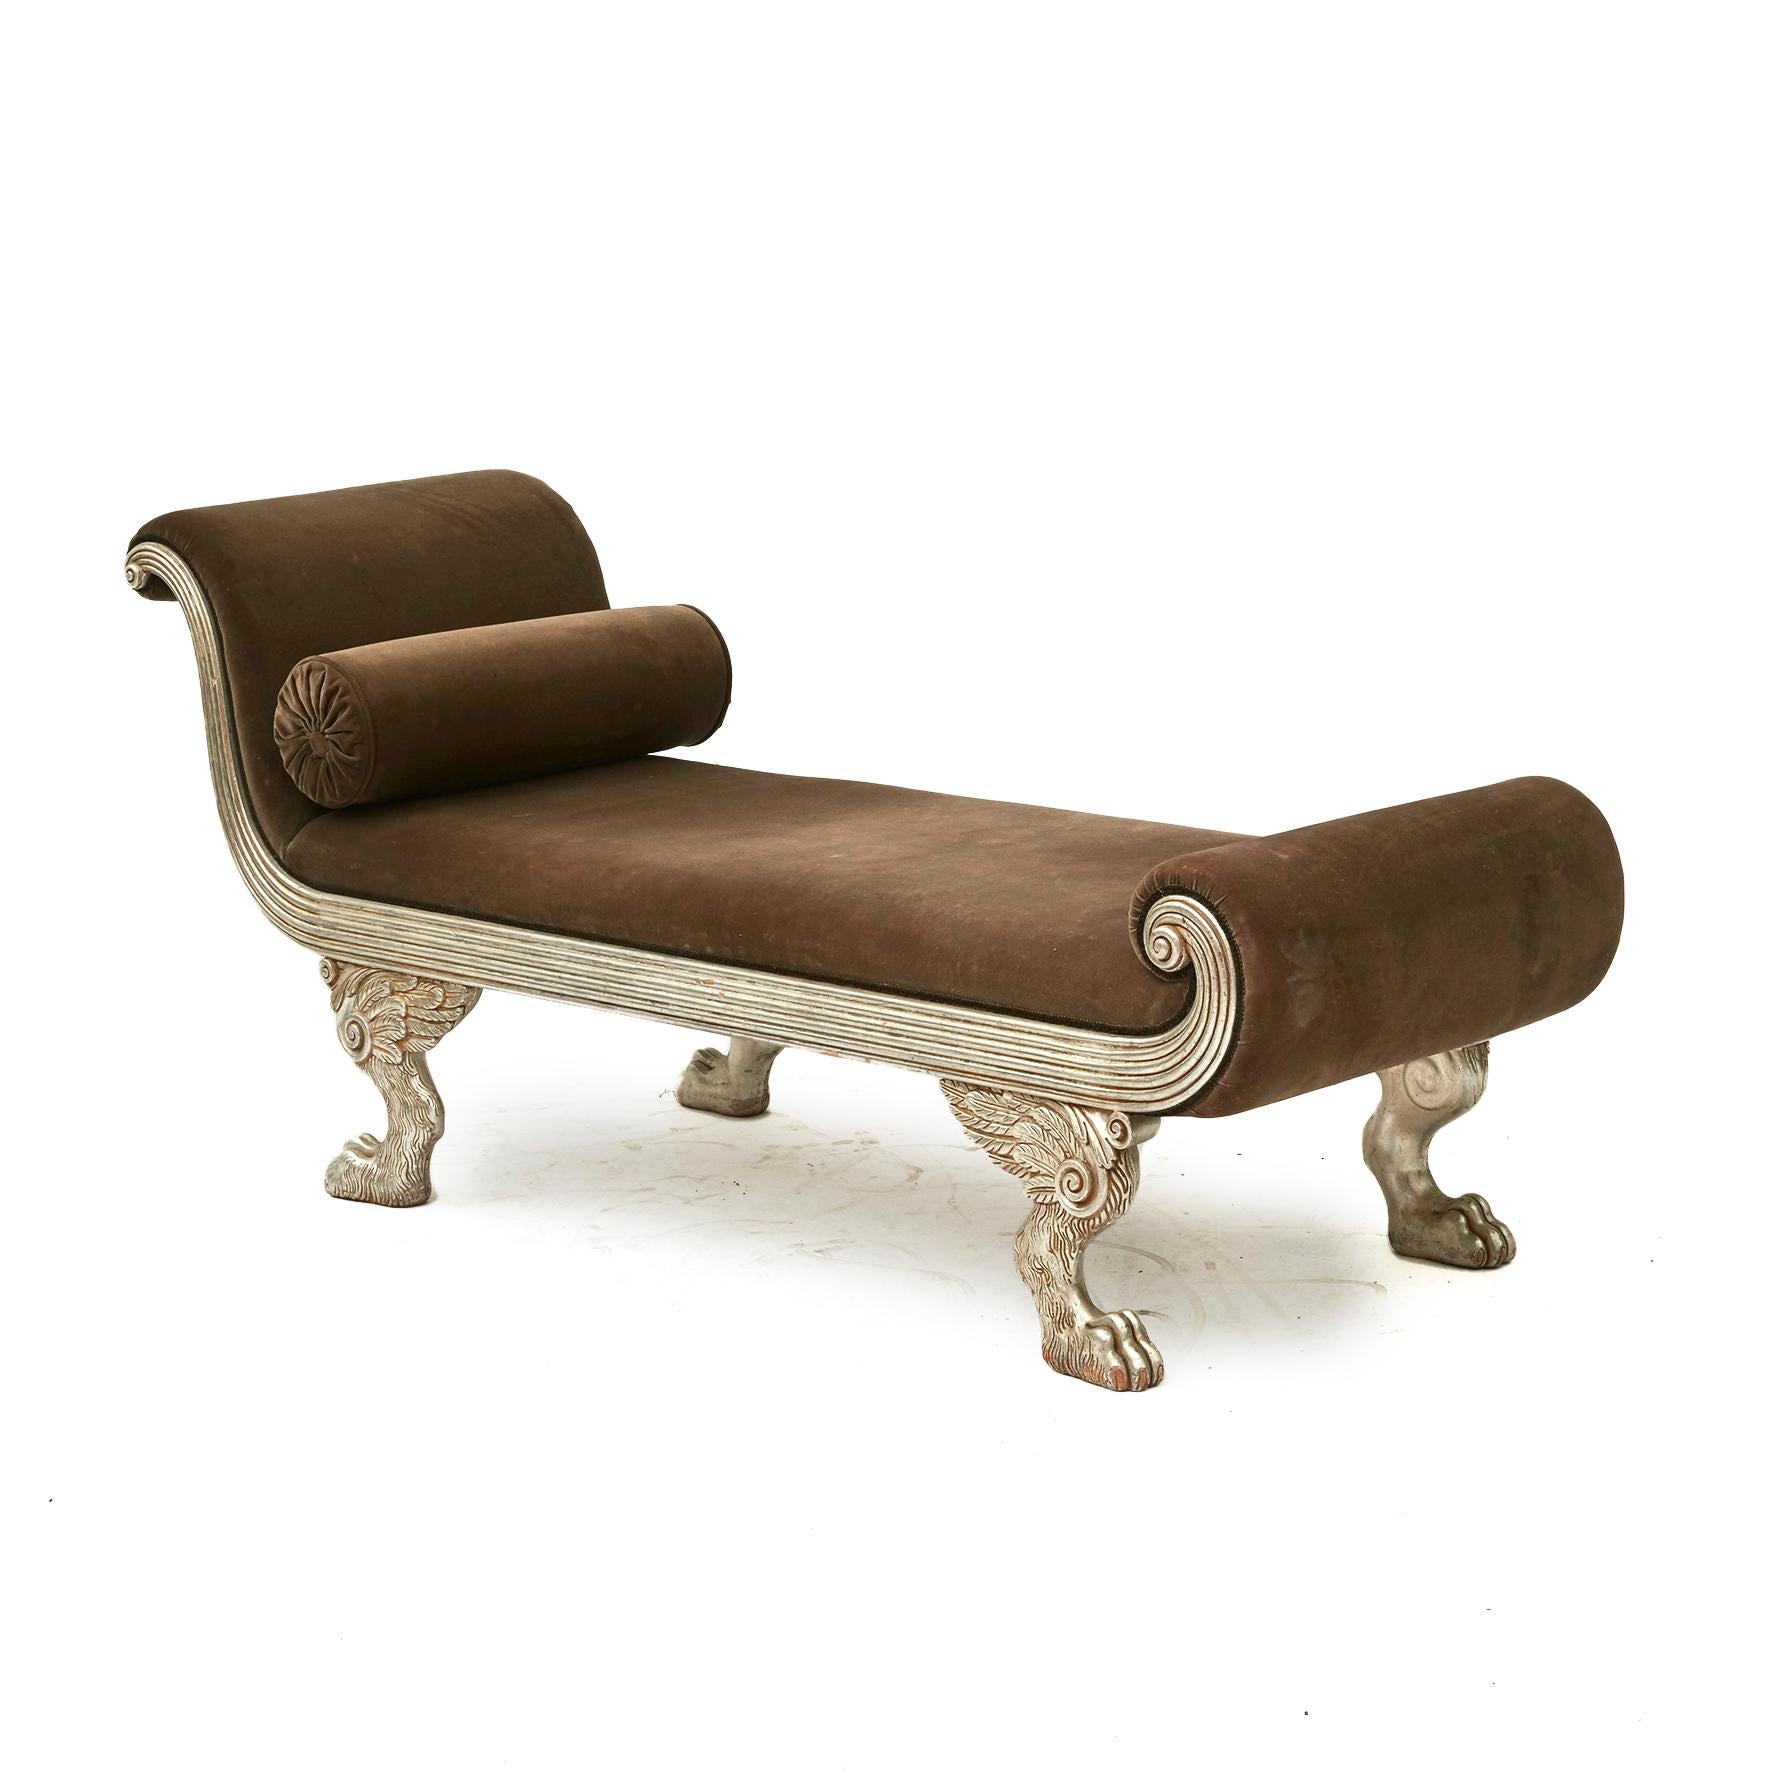 French 20th century recamier or daybed in the style of Charles X.
This elegant recamier is featuring graceful curves in the form of fluted scrolled ends and a silver giltwood finish.
Resting on four winged lions paw feet. Upholstered in brown